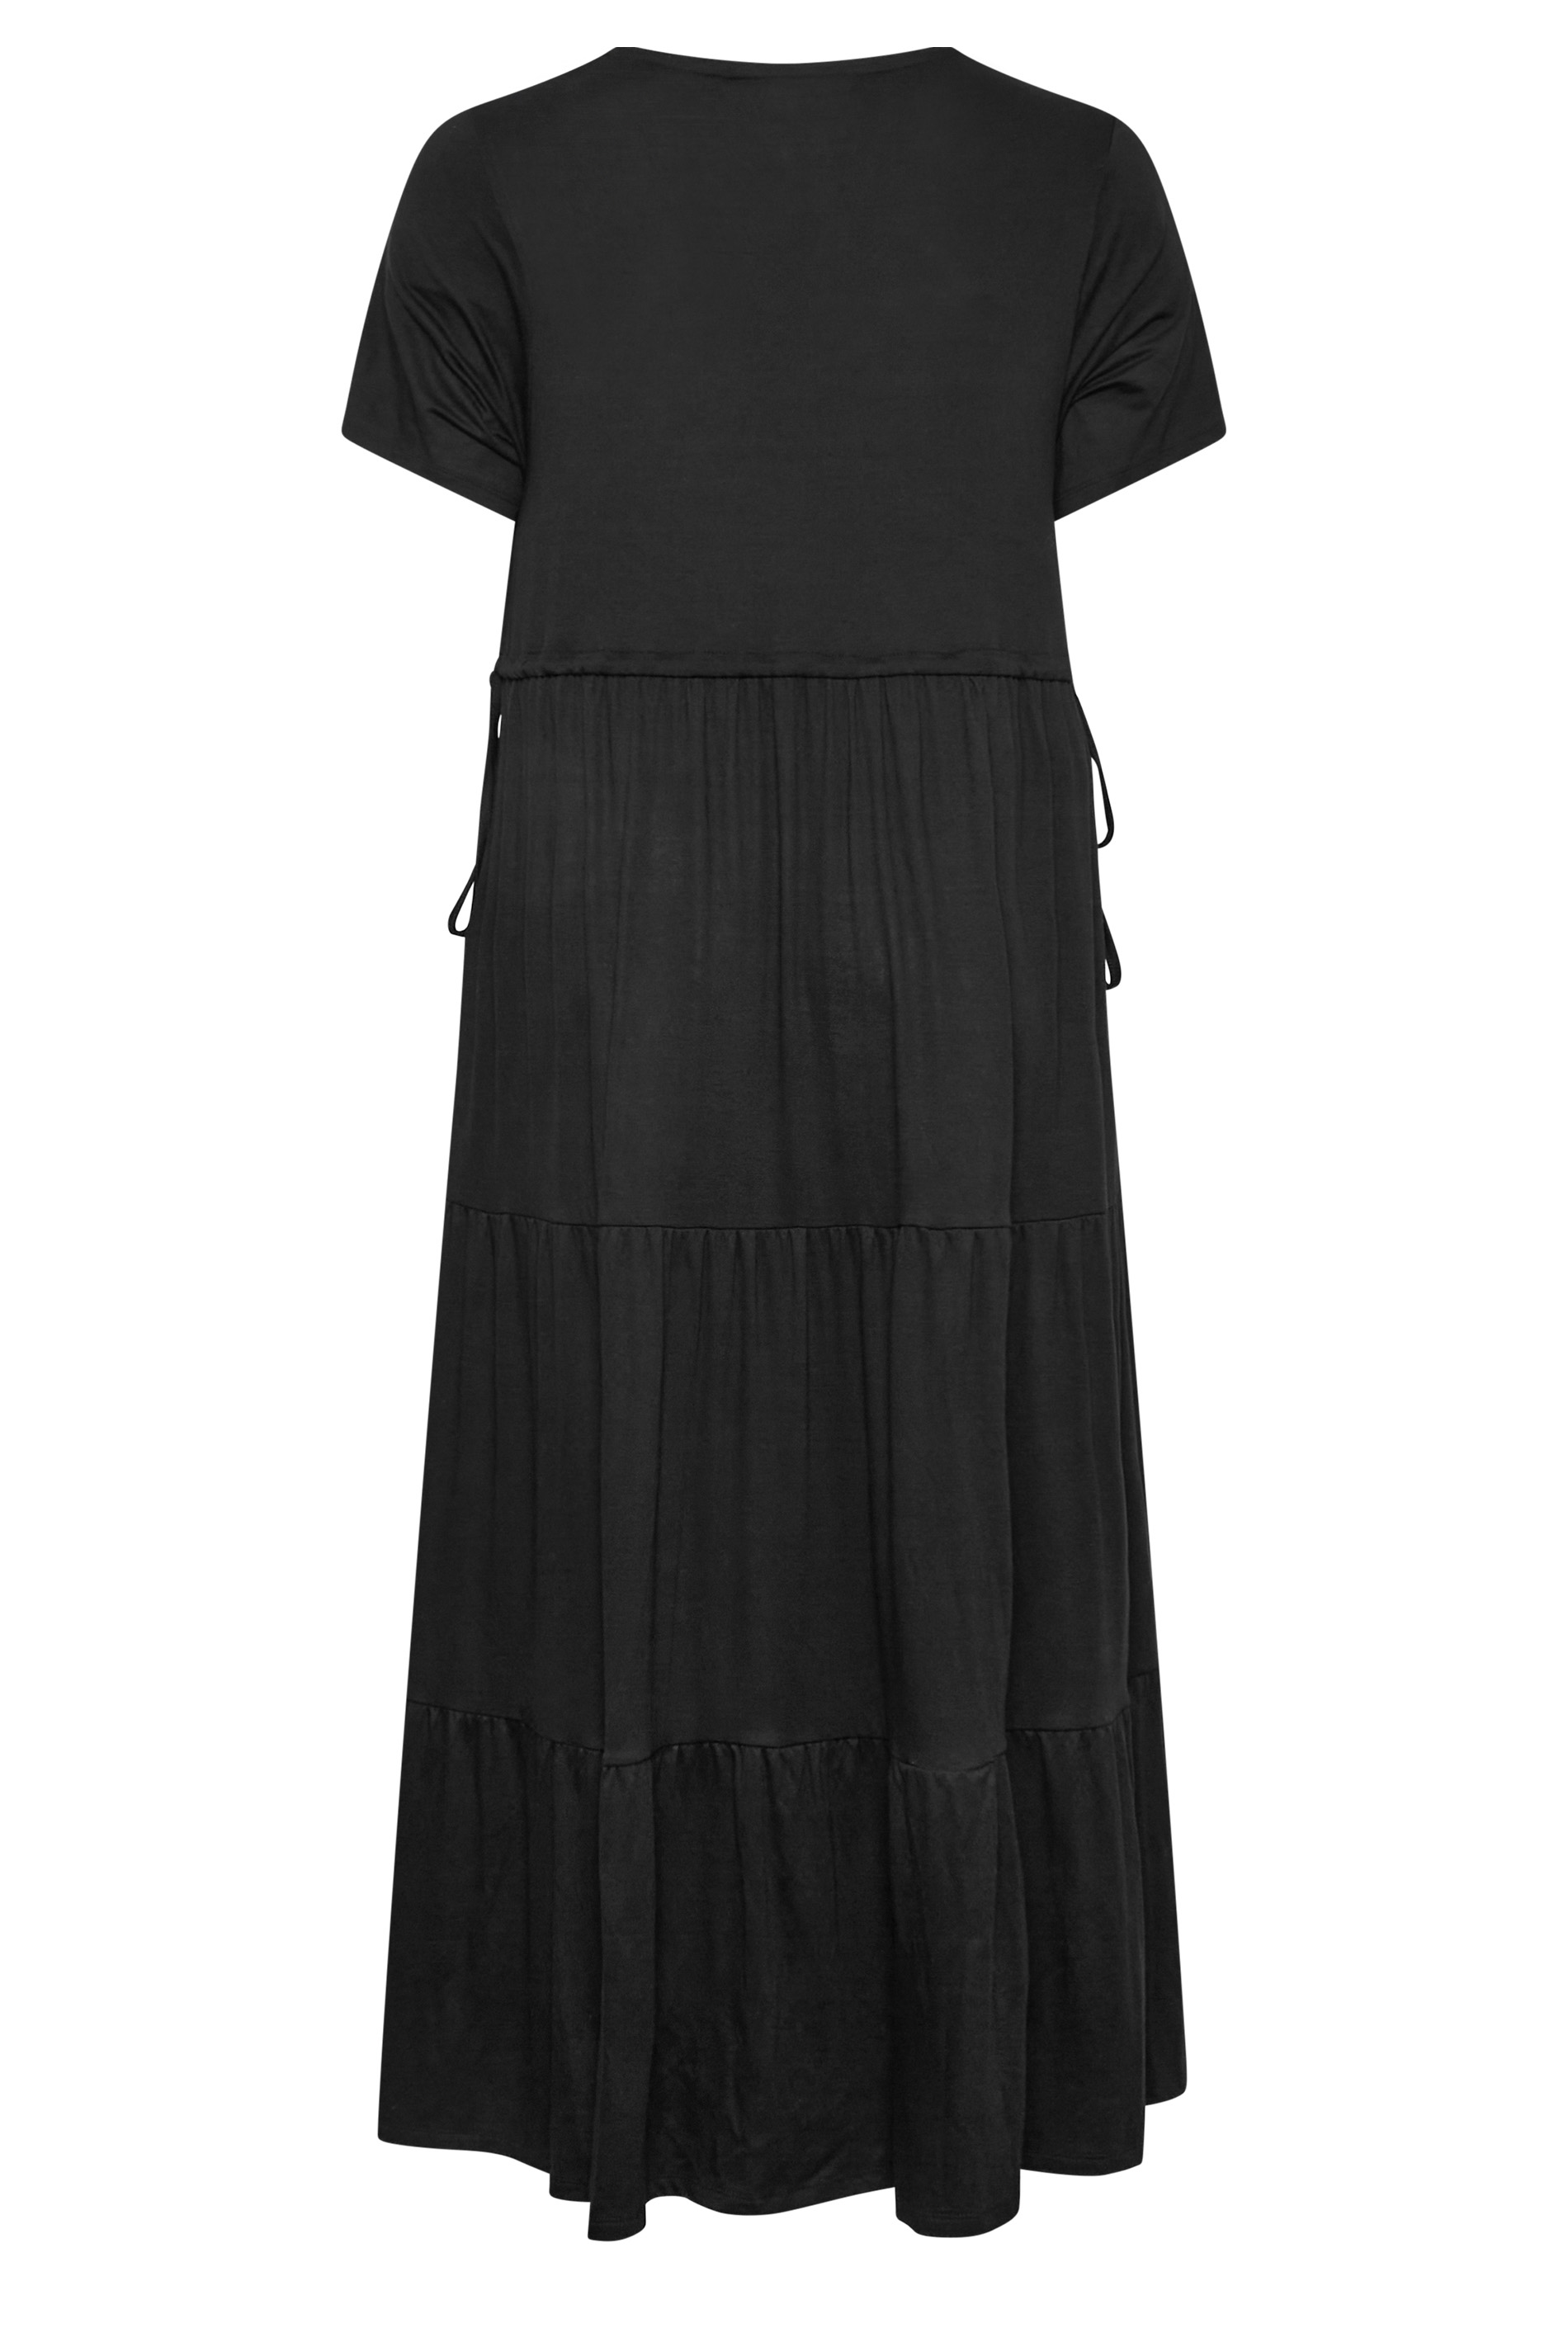 LIMITED COLLECTION Plus Size Black Maxi Adjustable Waist Dress | Yours ...